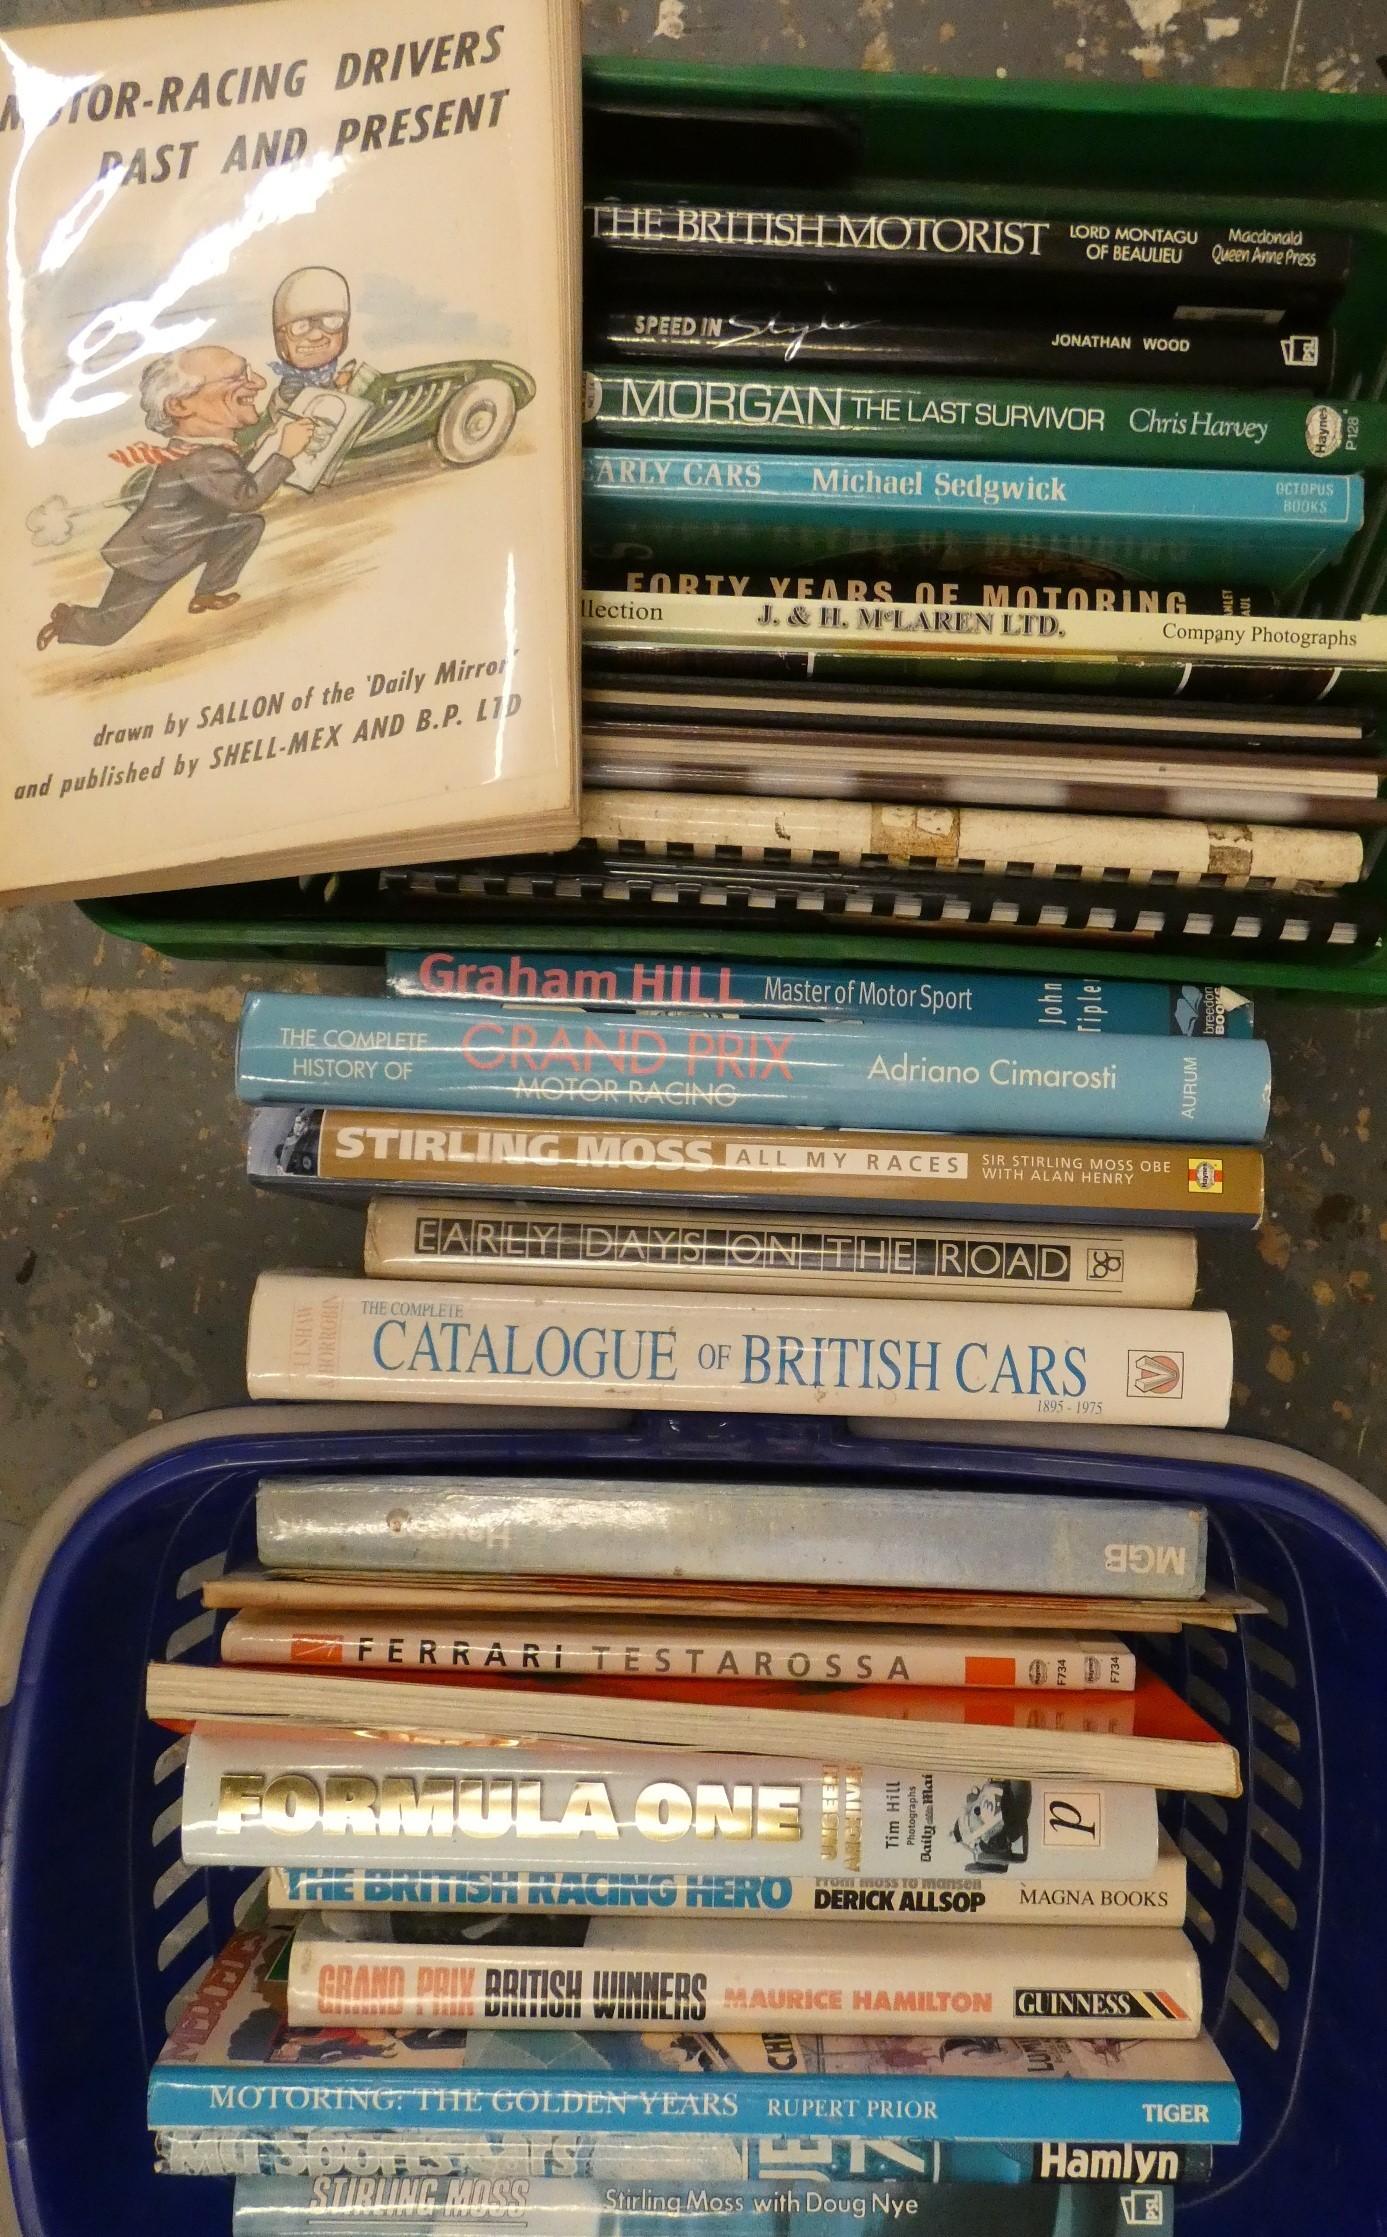 A collection of motoring books, including A Catalogue of British Cars.